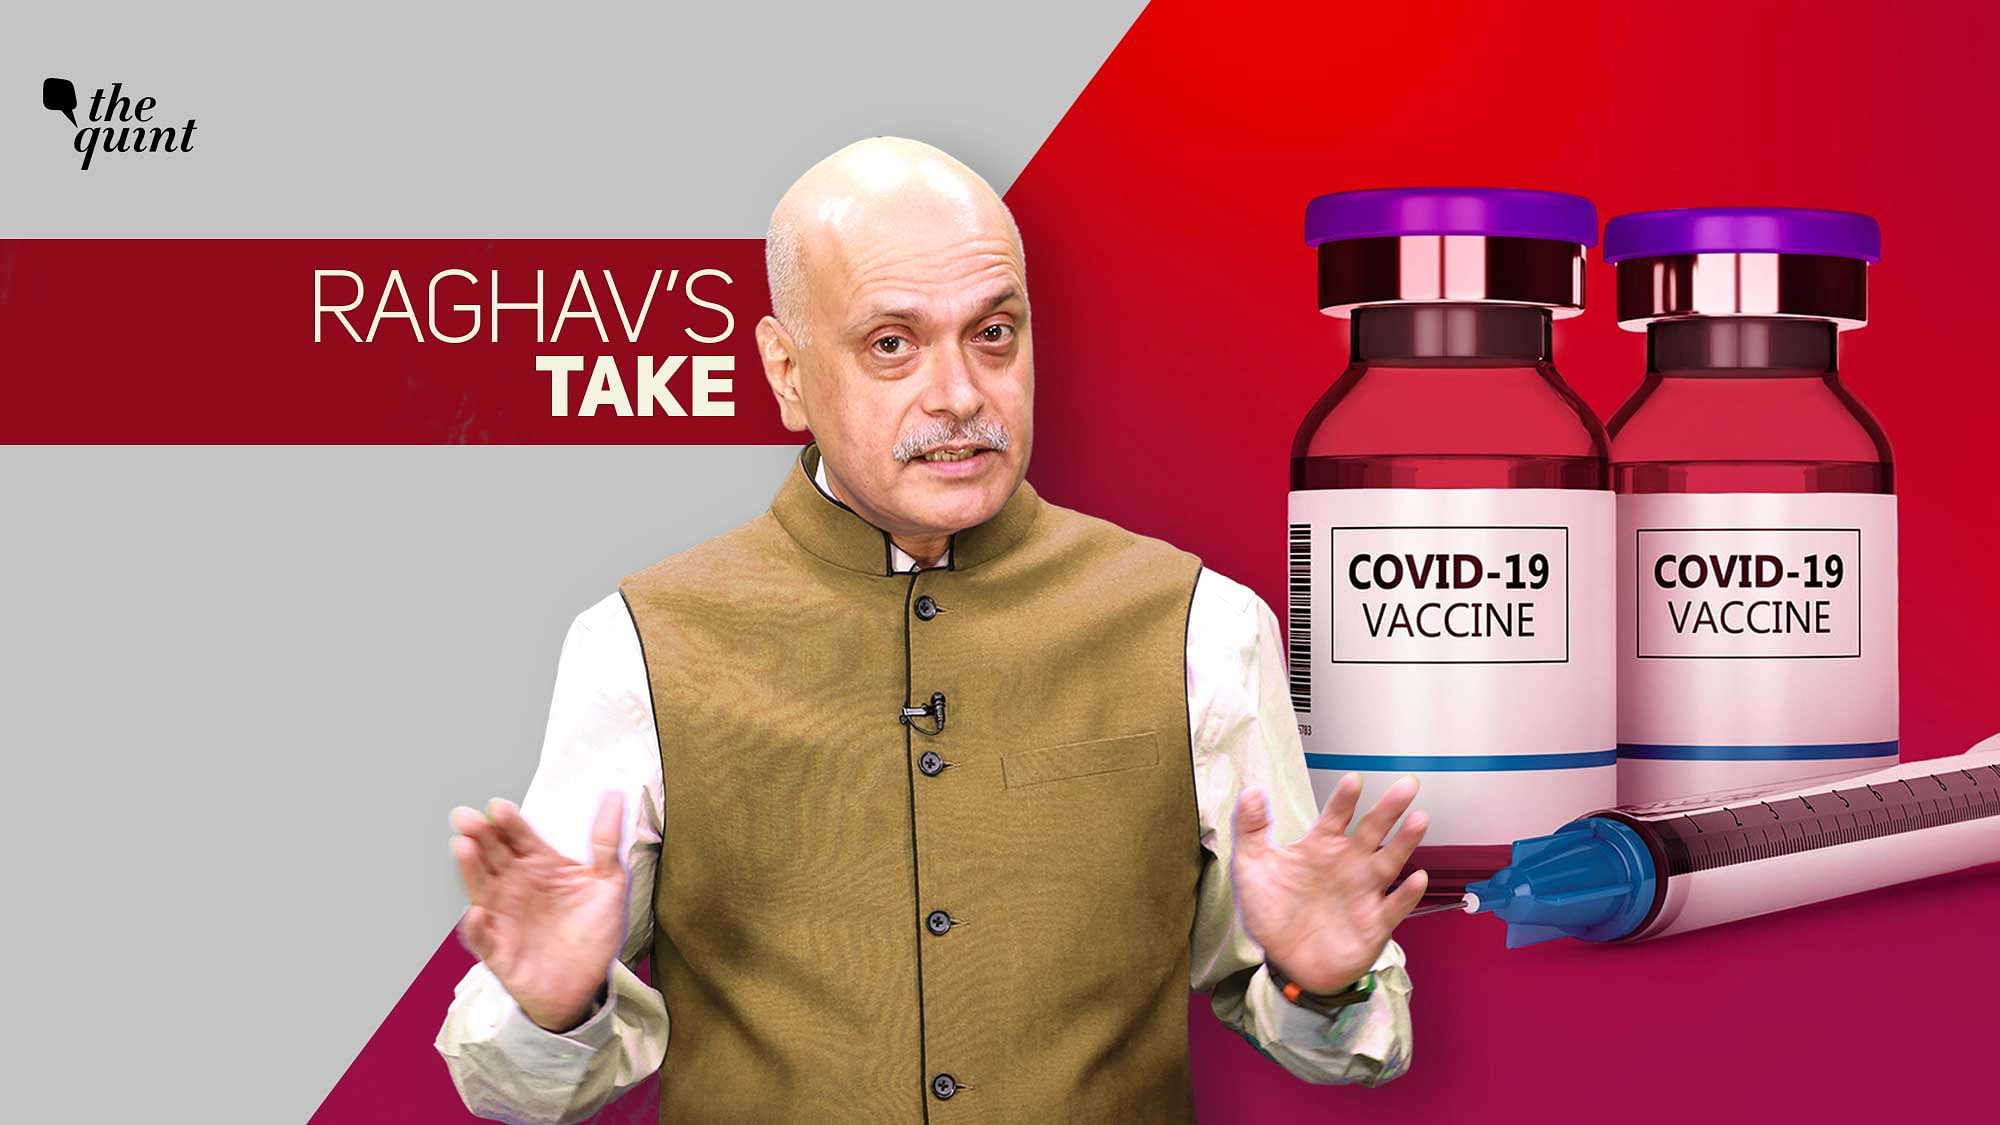 COVID-19 taxes to vaccines, The Quint’s Editor-in-Chief Raghav Bahl shares his views on India’s pandemic fight.